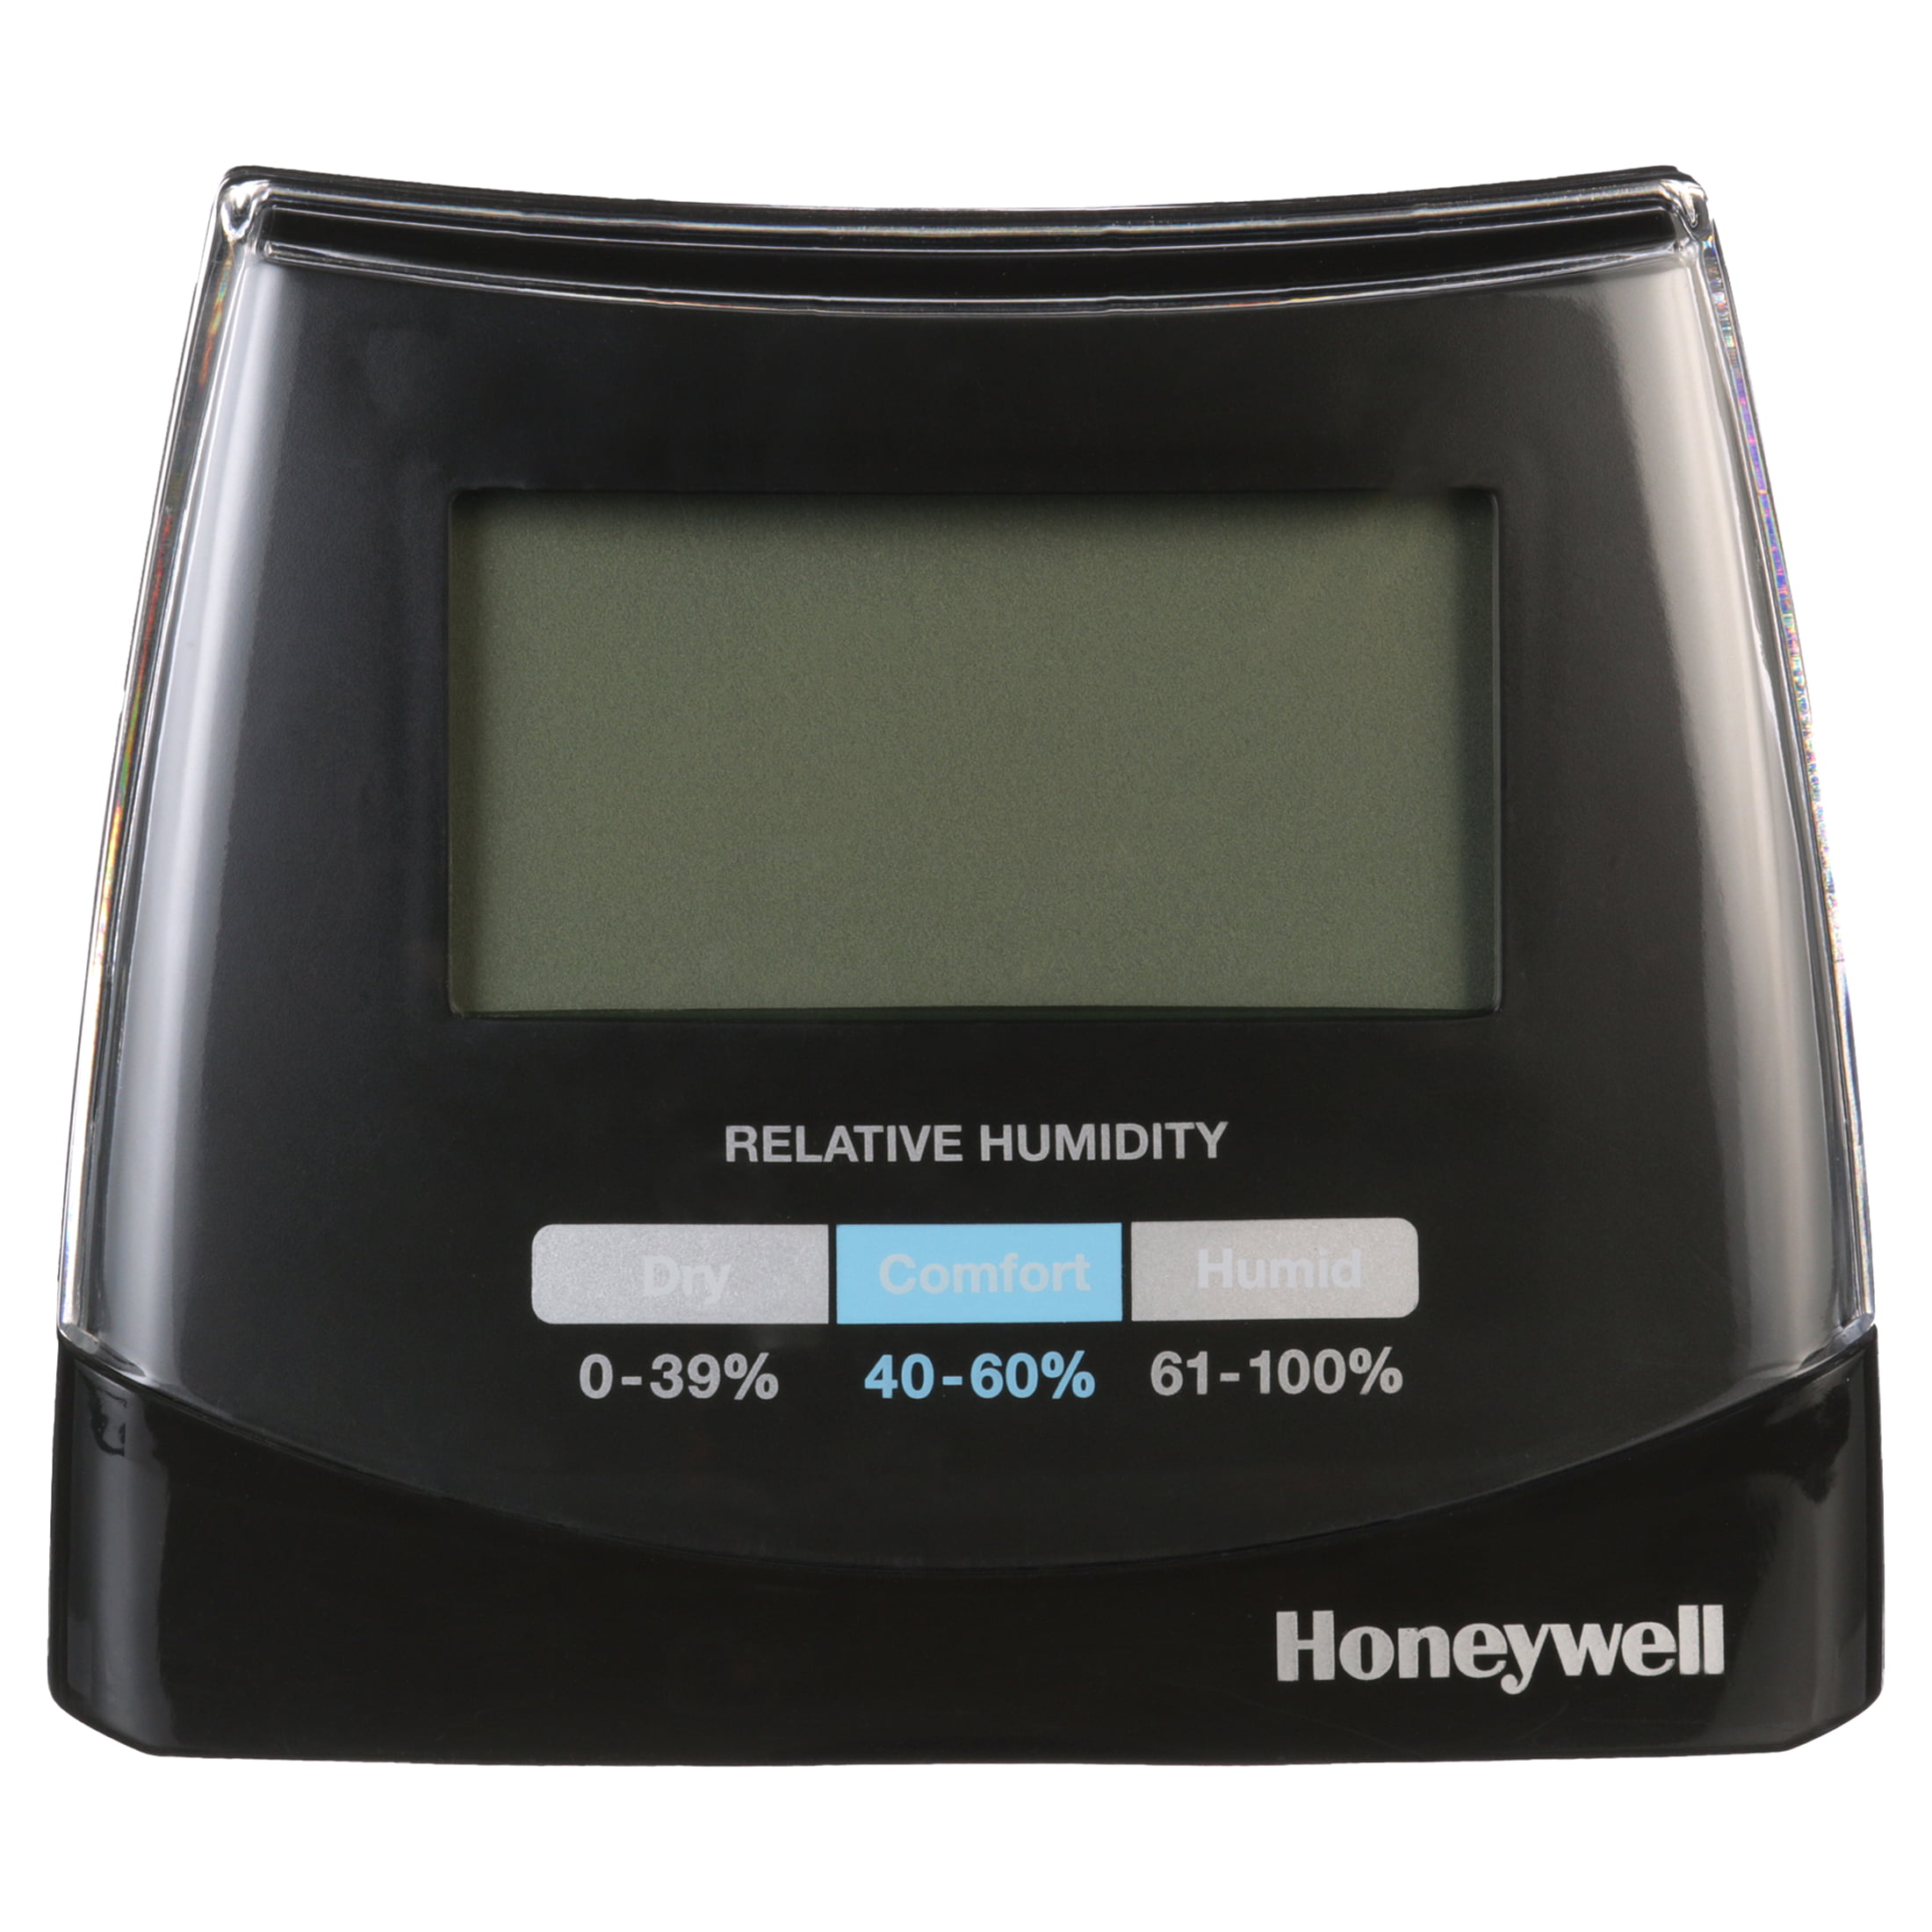 MULTICOMP PRO MP780117 Humidity Meter, 0% to 100% Relative Humidity, 5 %,  0.1 °C, 110 mm, 53 mm, 26 mm